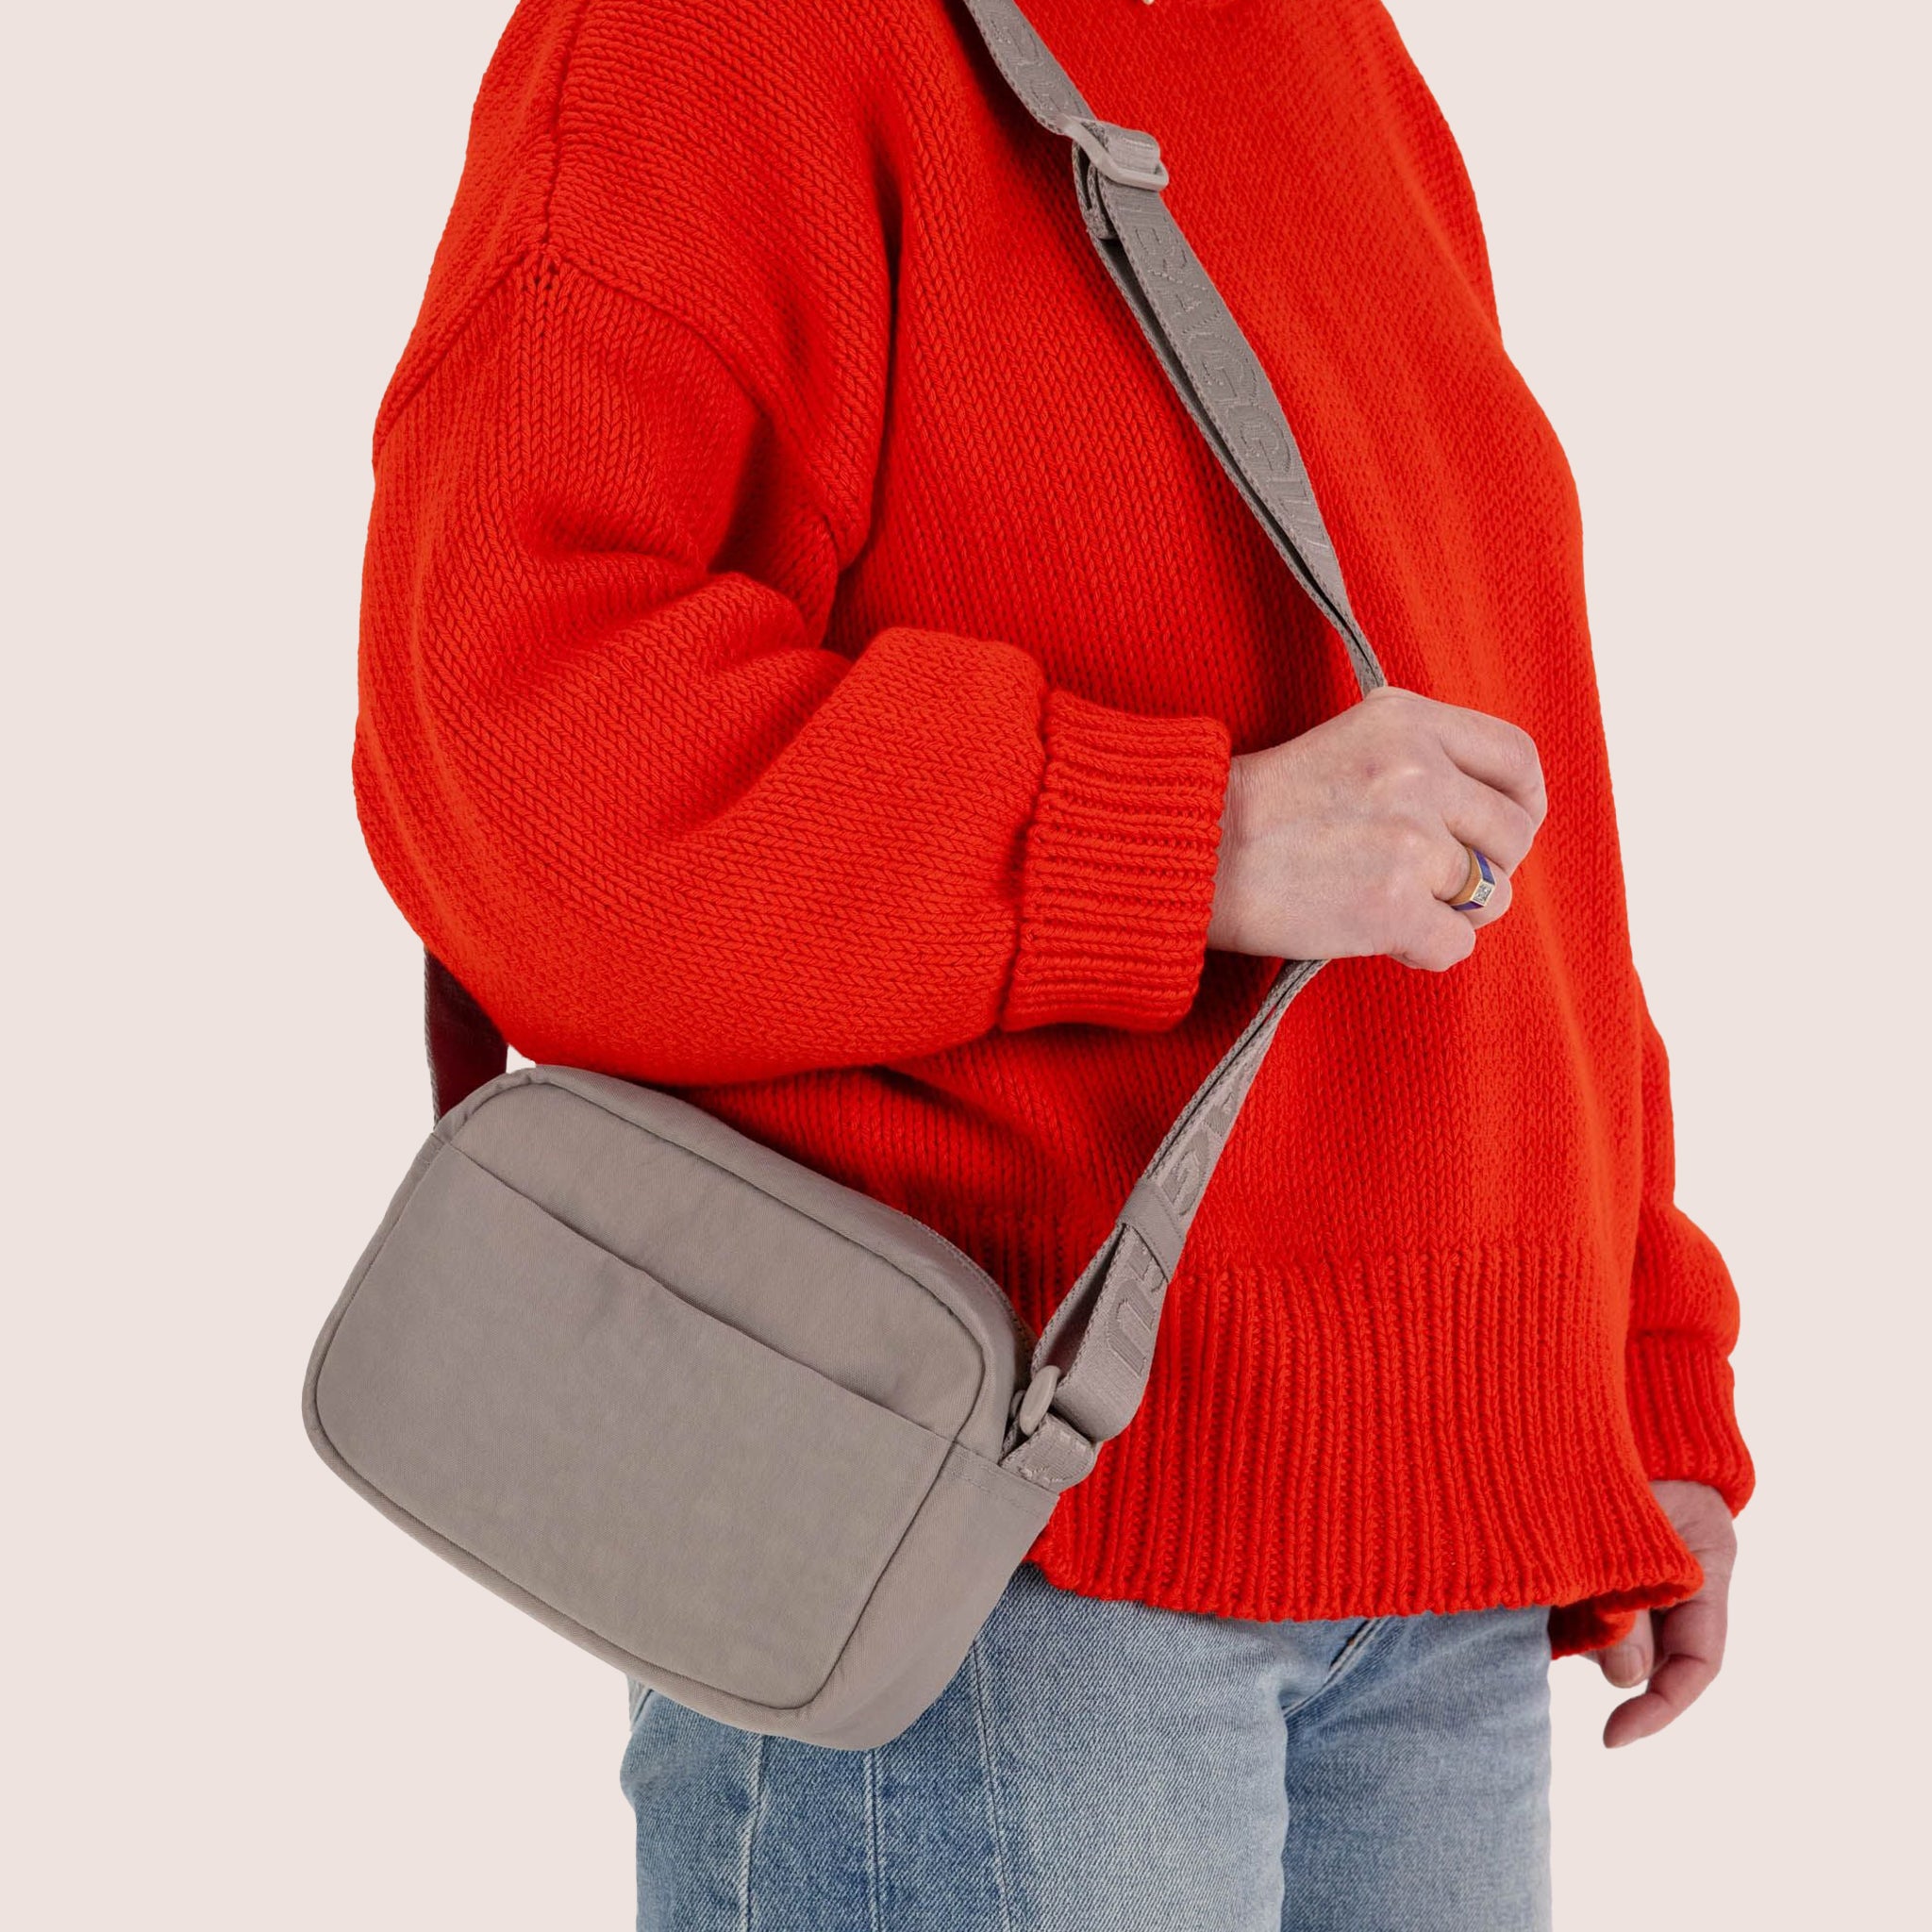 A tannish grey colored crossbody bag with an adjustable strap.